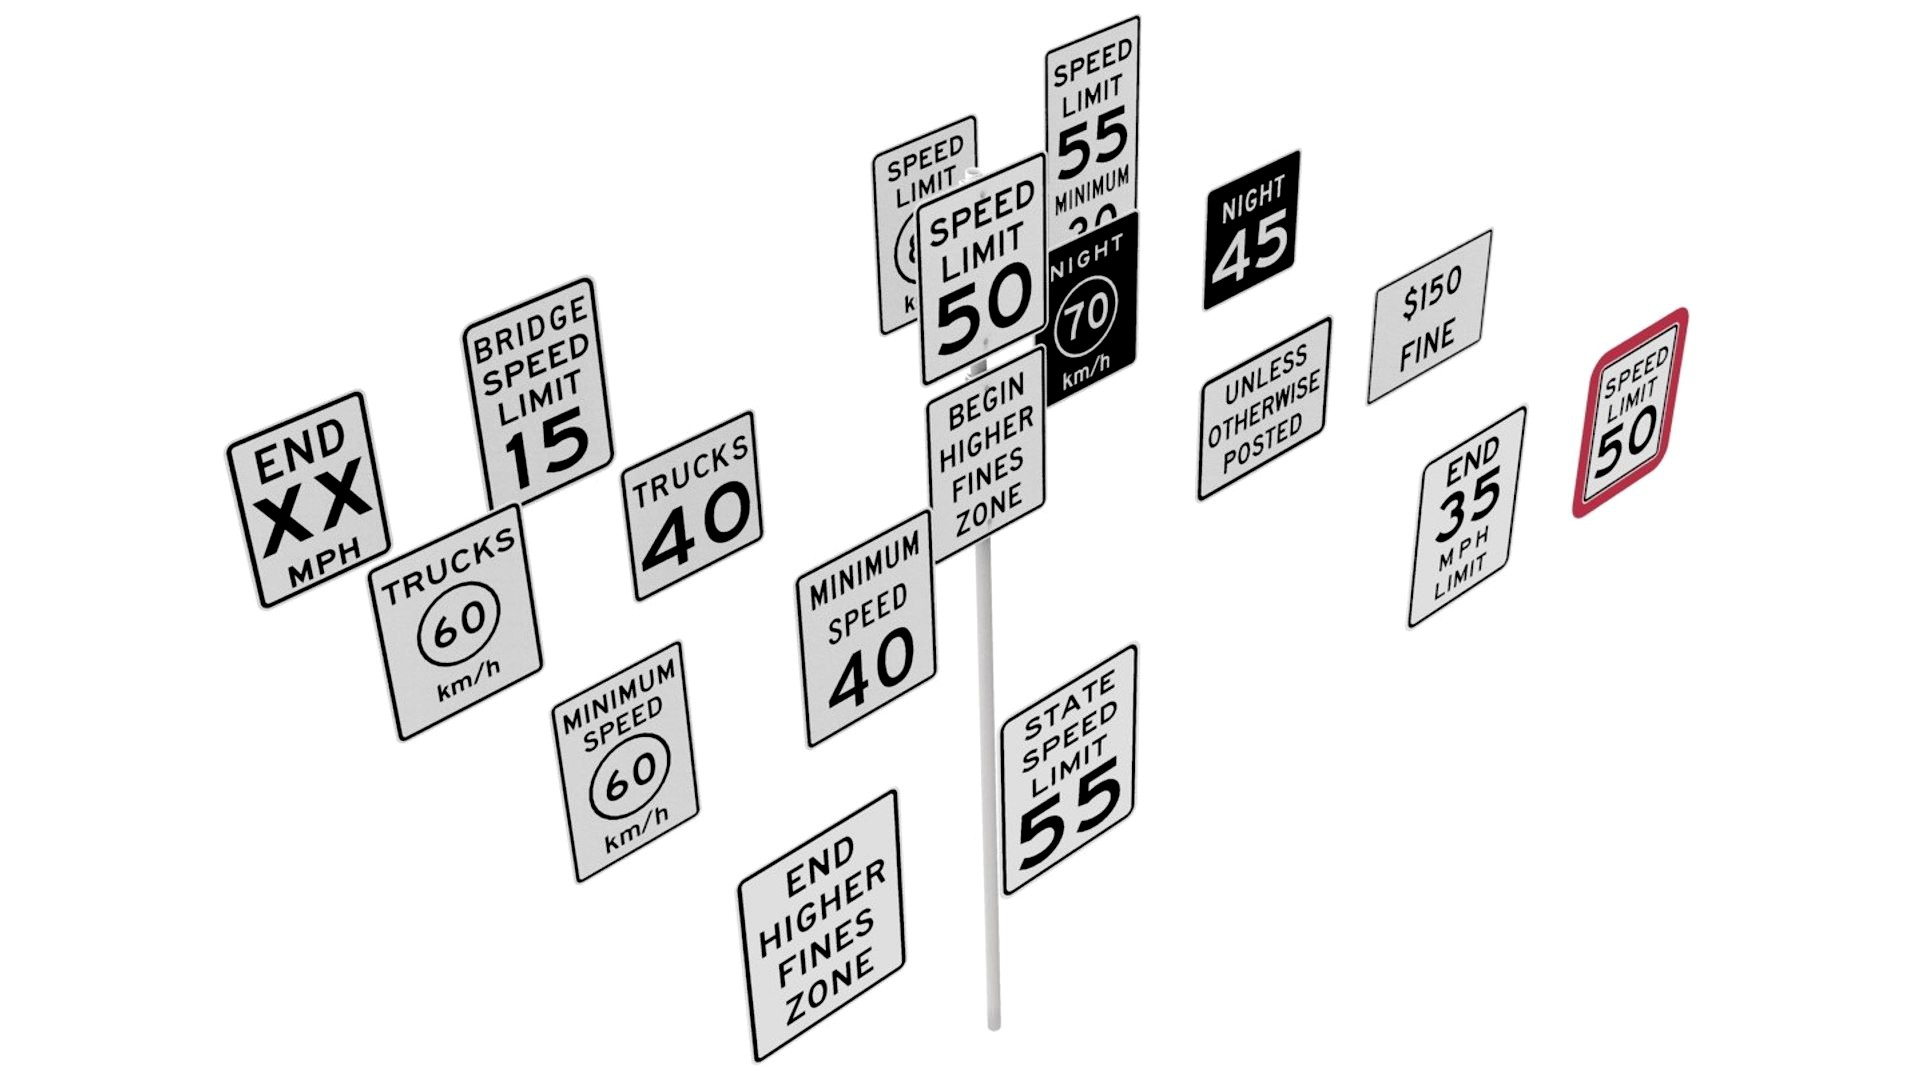 Road Sign US R2 Series Speed Limit Collection